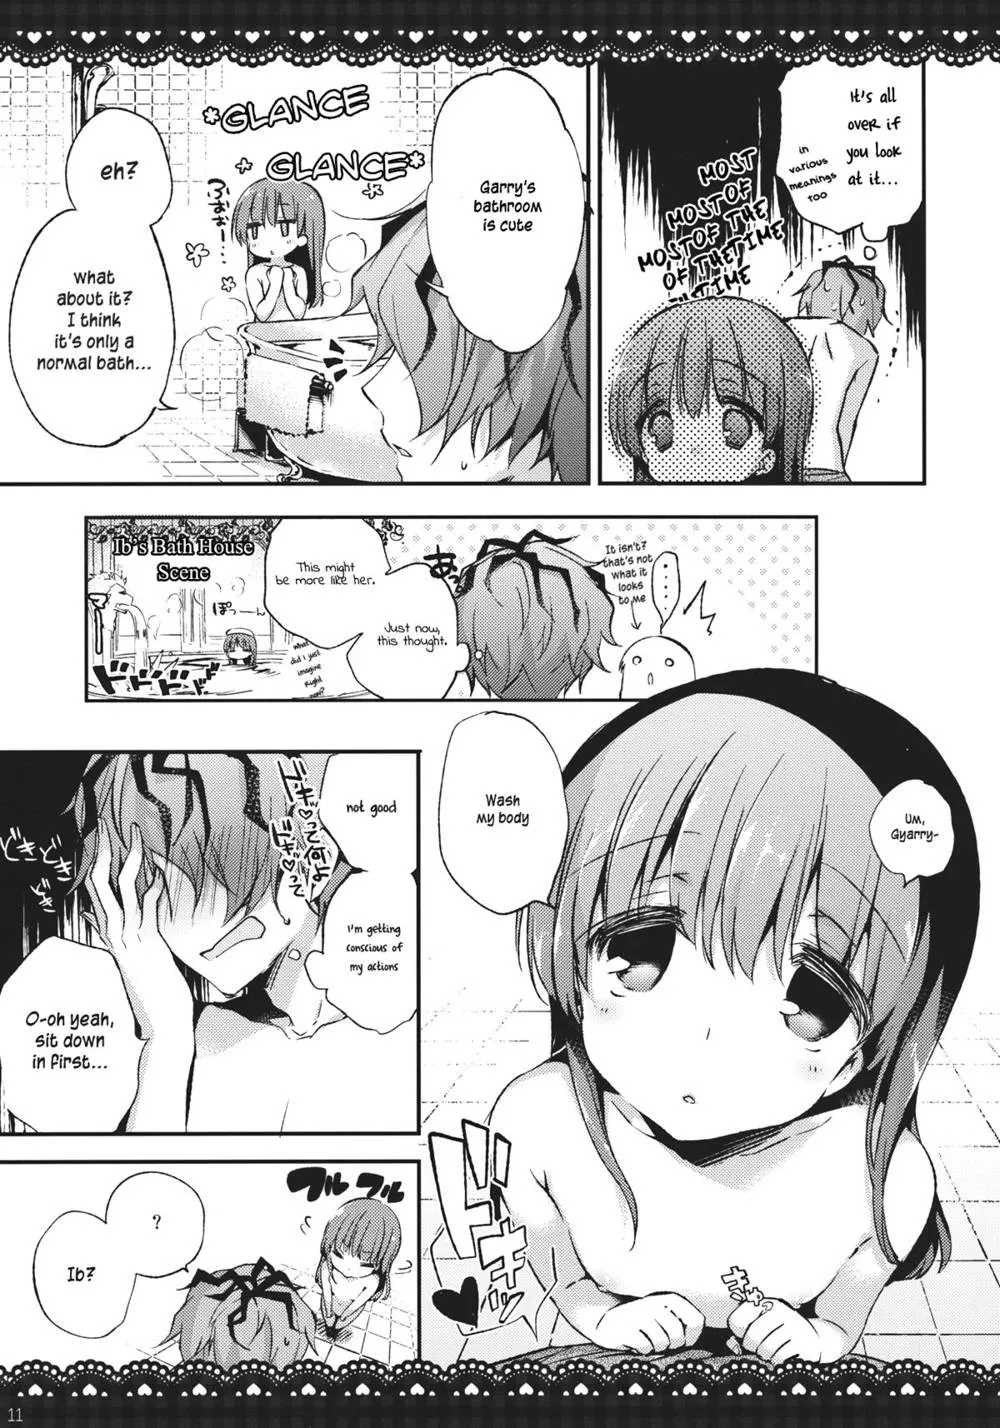 Ib,What Happens When You're In A Bath Together, Garry And Ib? [English][第10页]